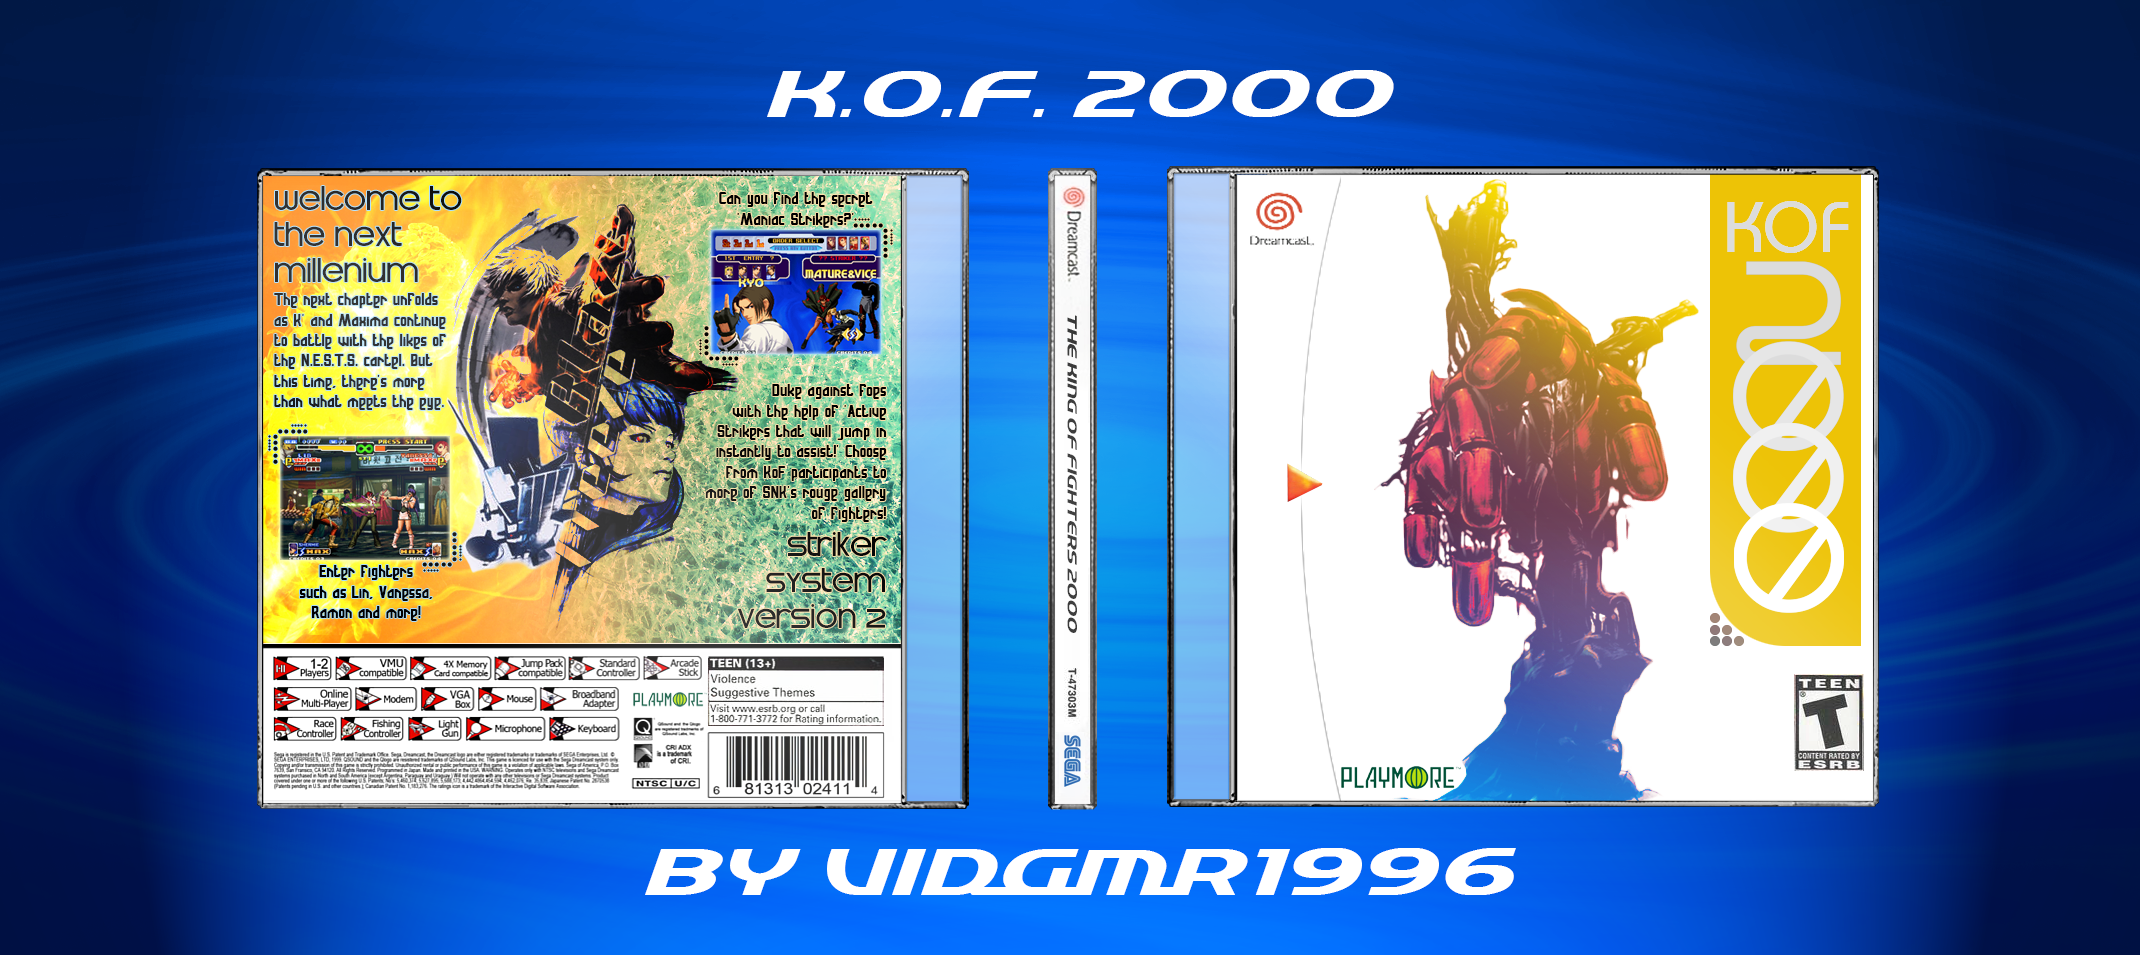 The King of Fighters 2000 box cover